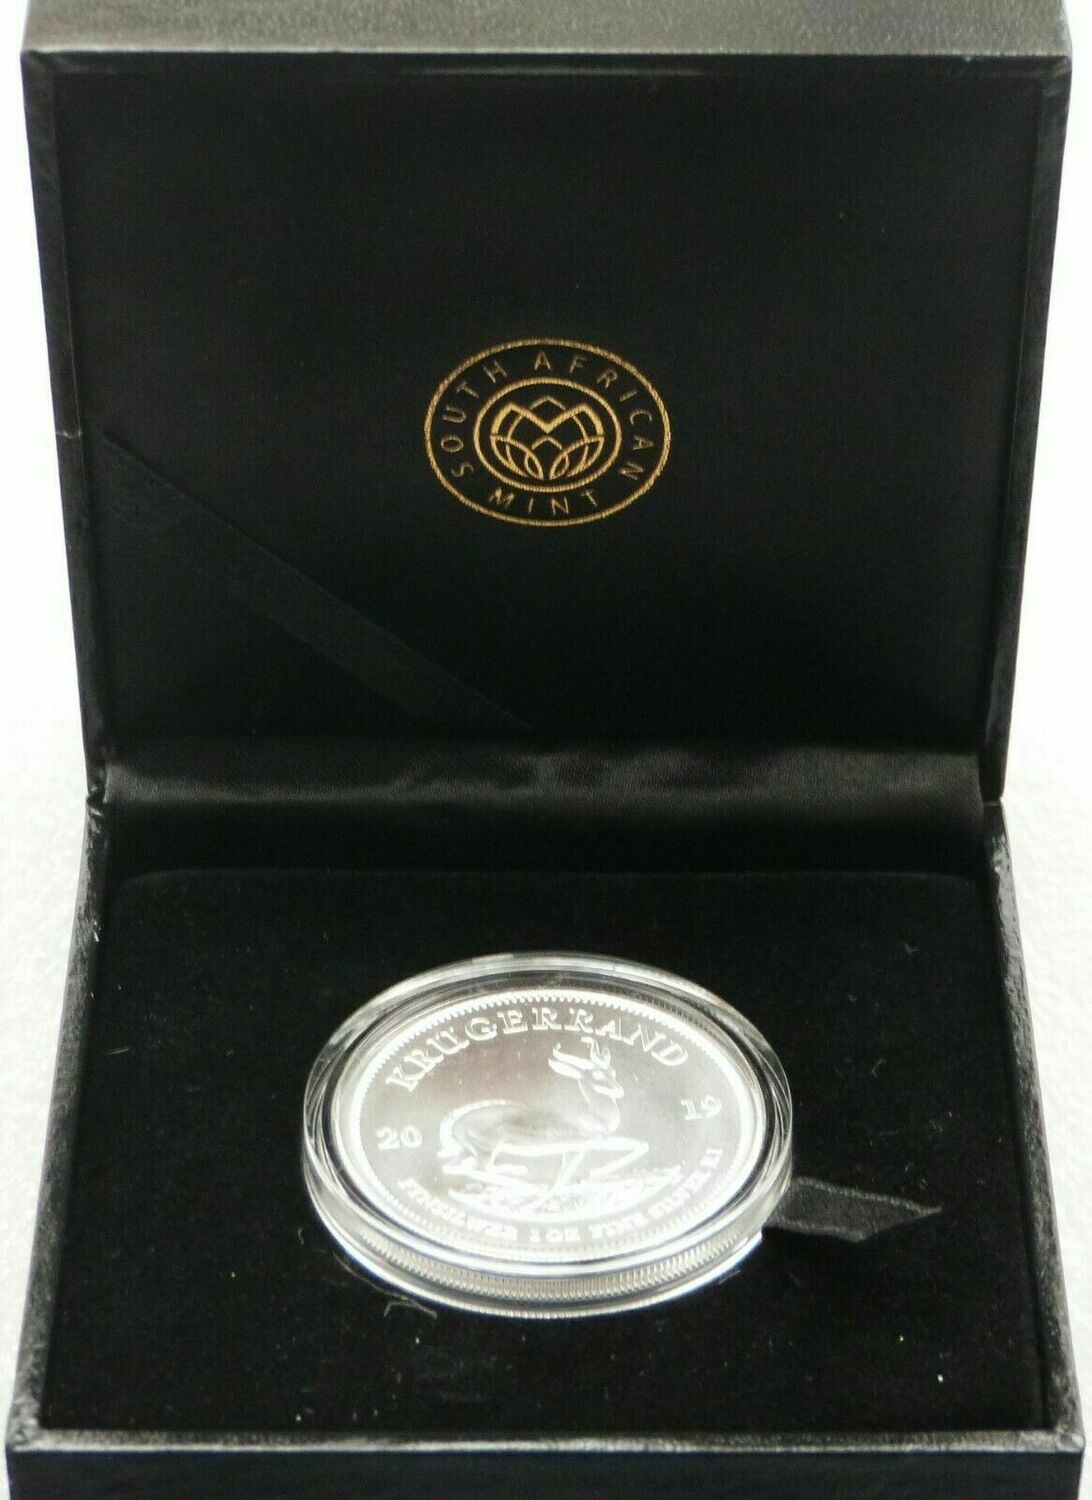 2019 South Africa Krugerrand Silver 1oz Coin Boxed